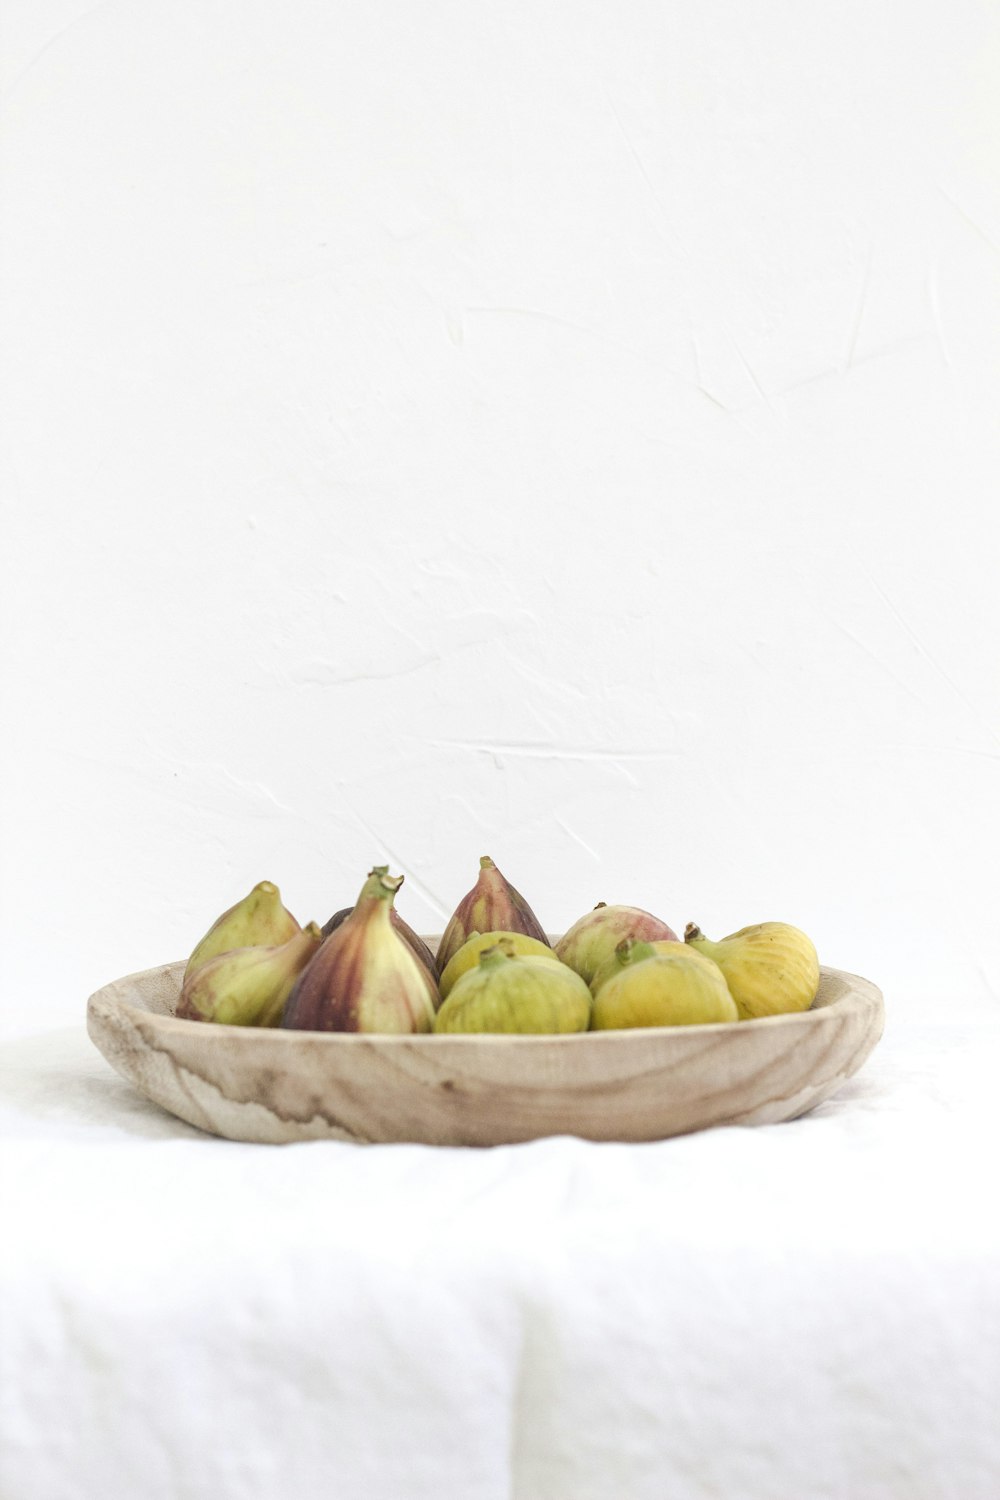 figs on round tray